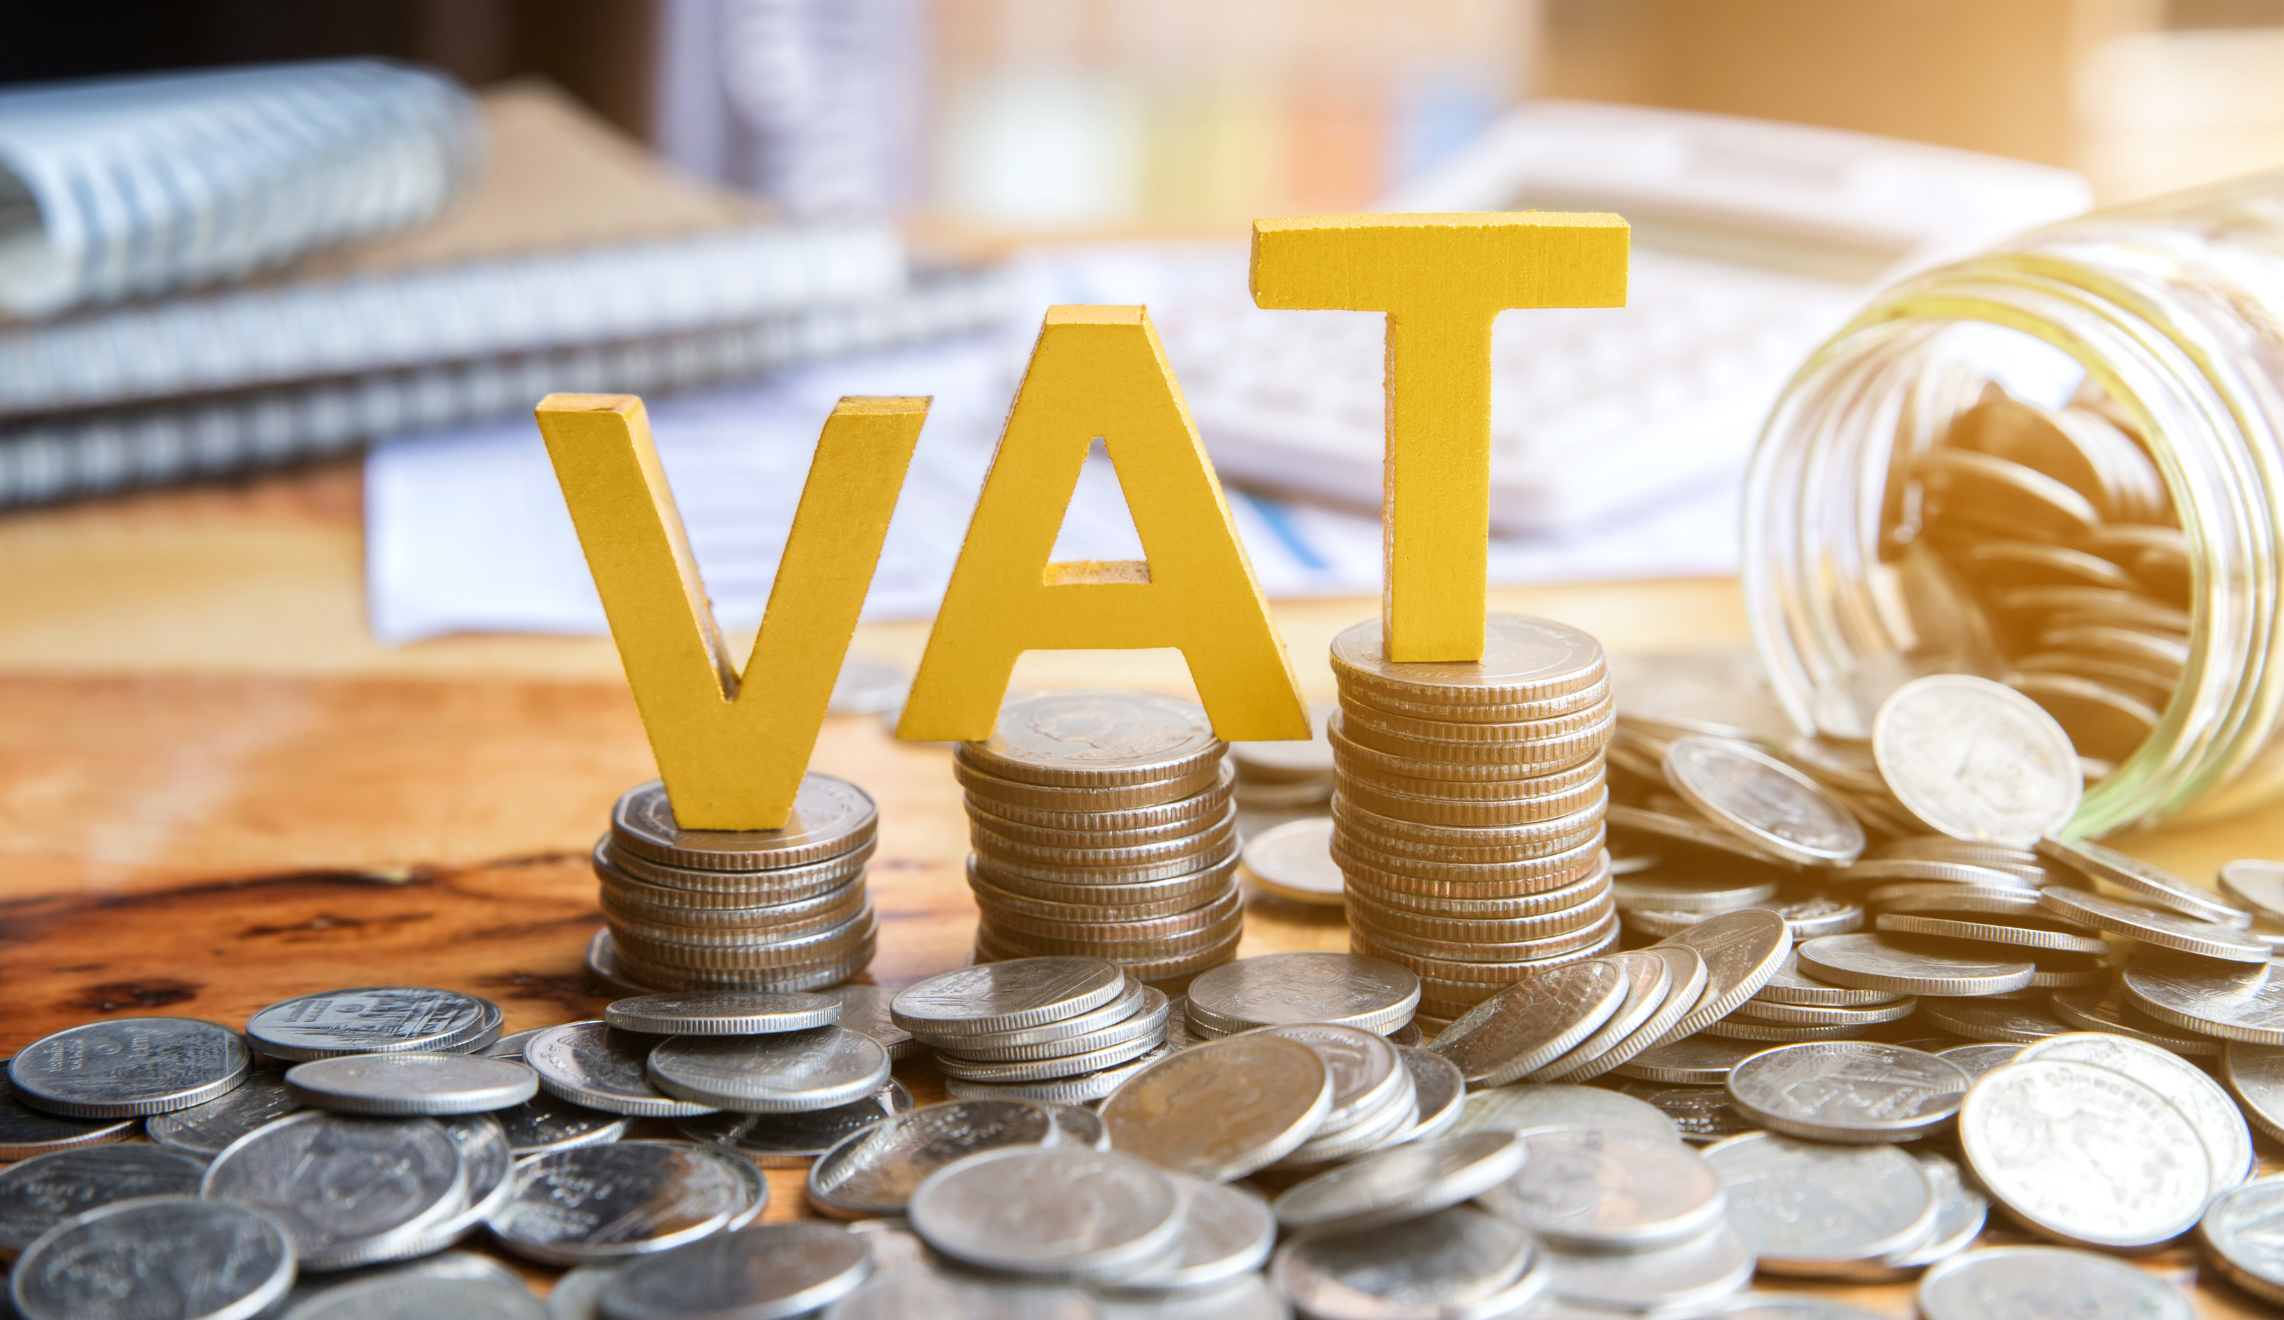 Online VAT filing portal to close in May Banner Photo